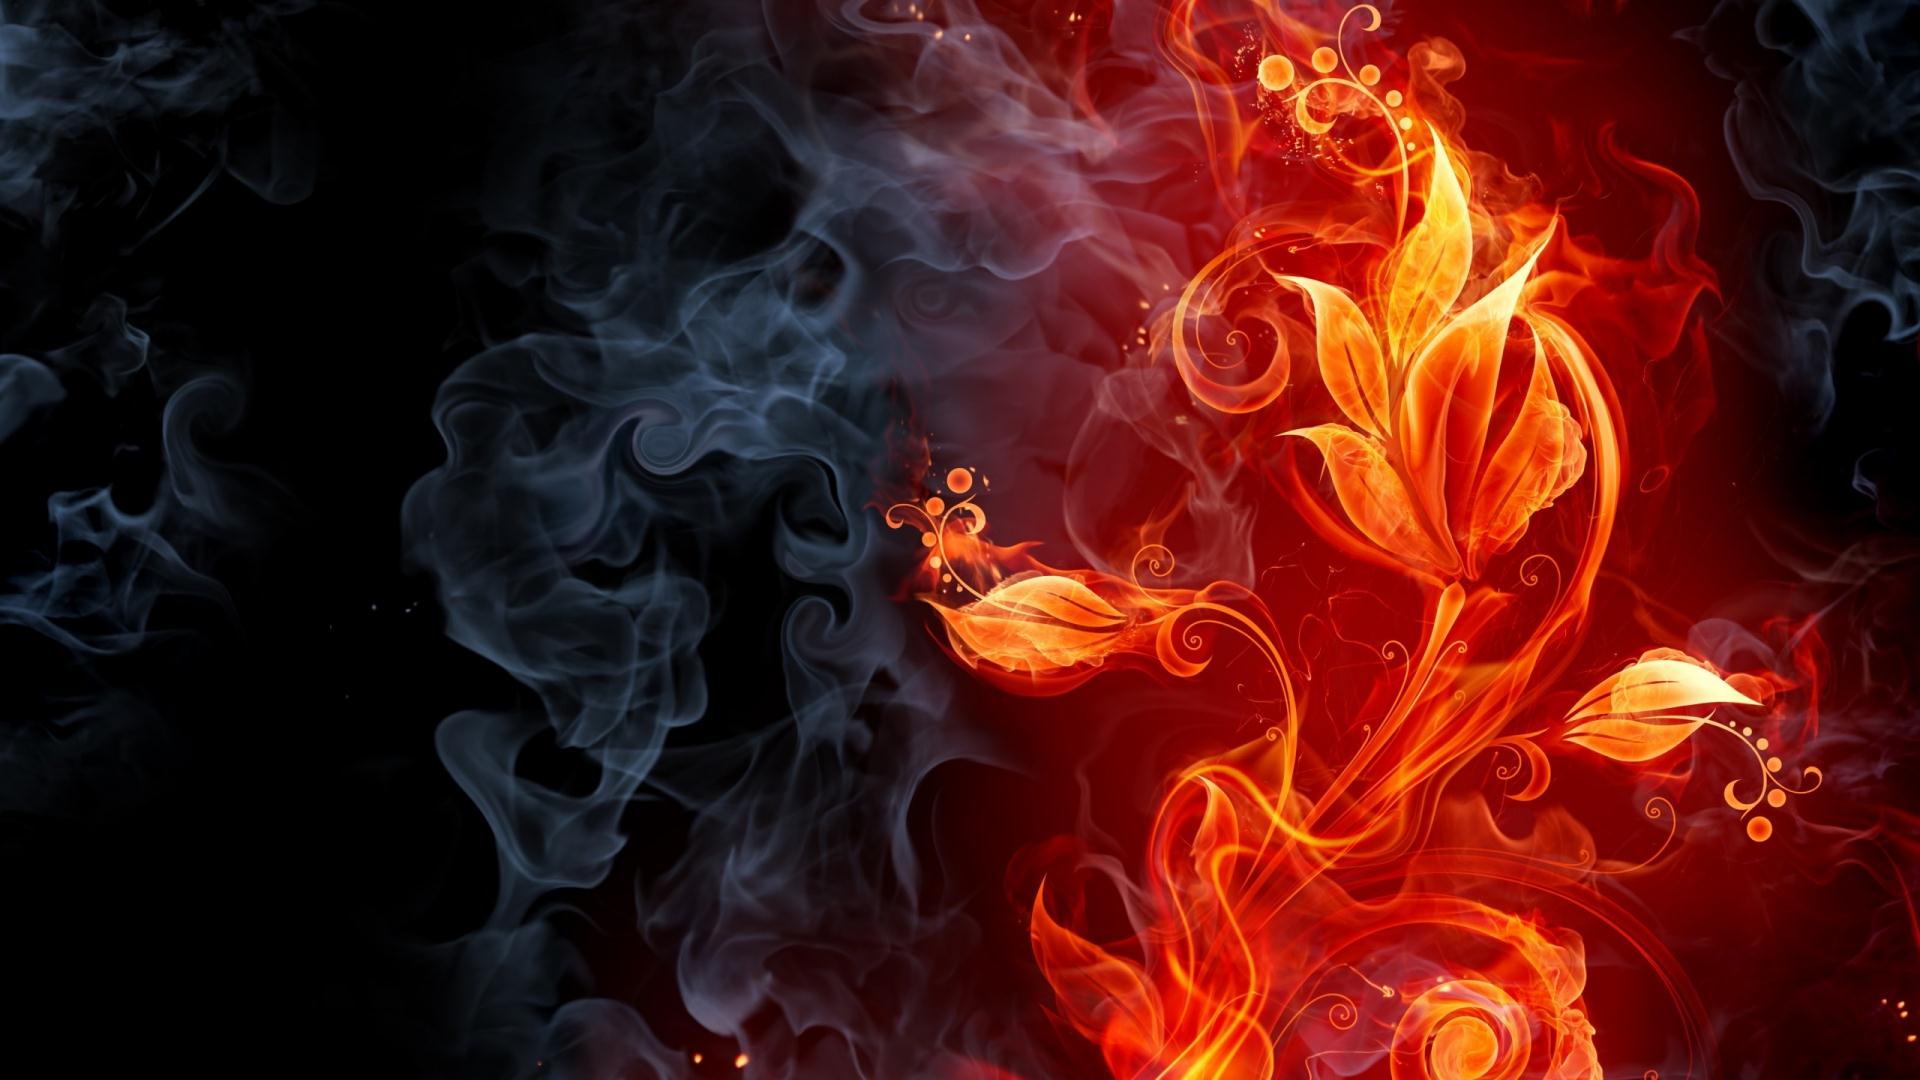 Fire Wallpapers For Free Download #4744 Wallpaper | Wallpaperyup.com